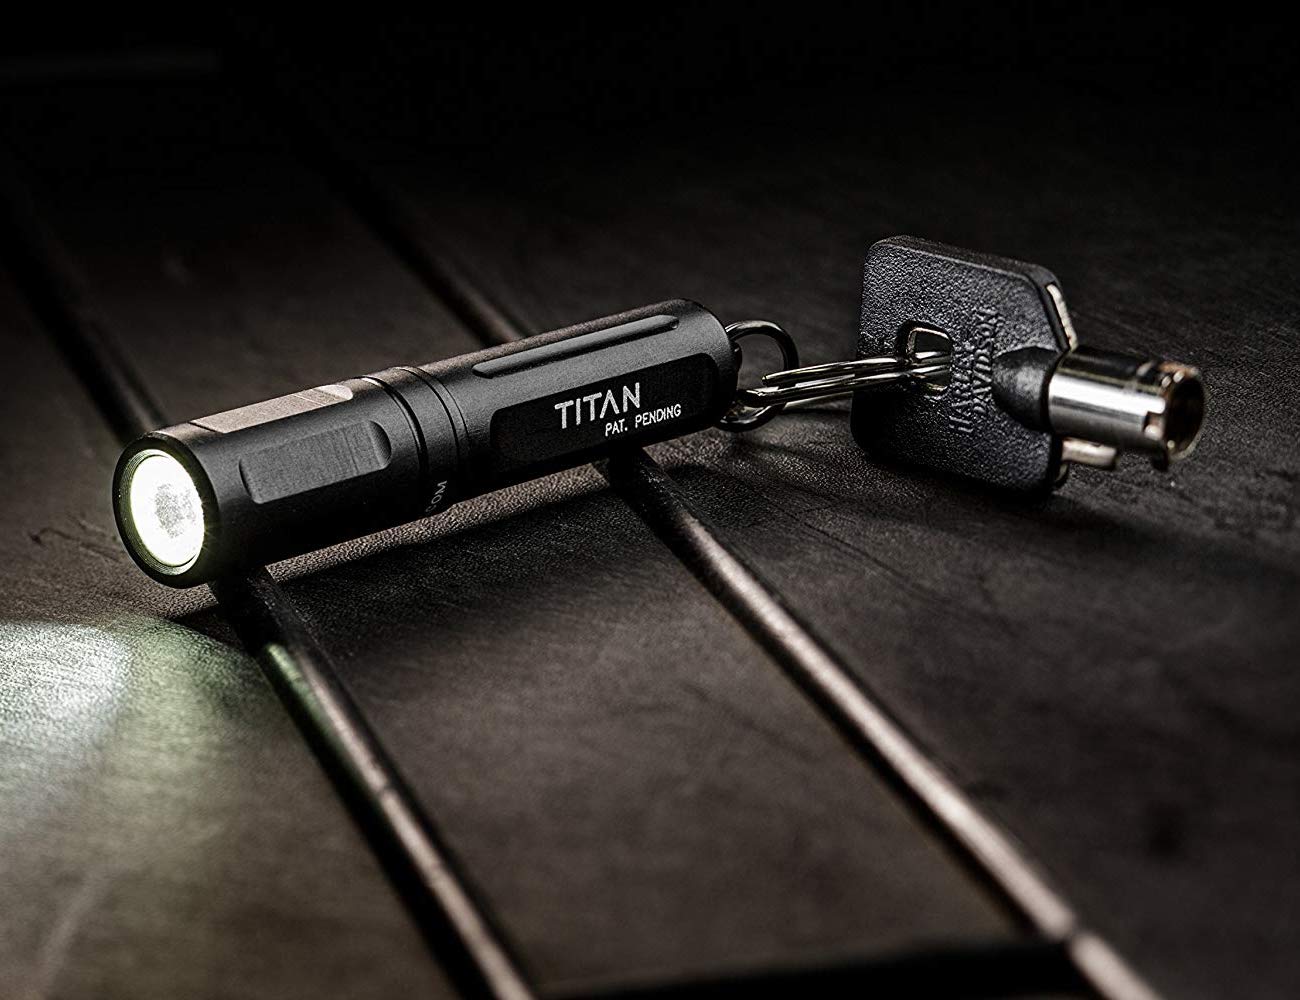 Surefire Titan Ultra-Compact LED Keychain Light is a powerful and portable flashlight